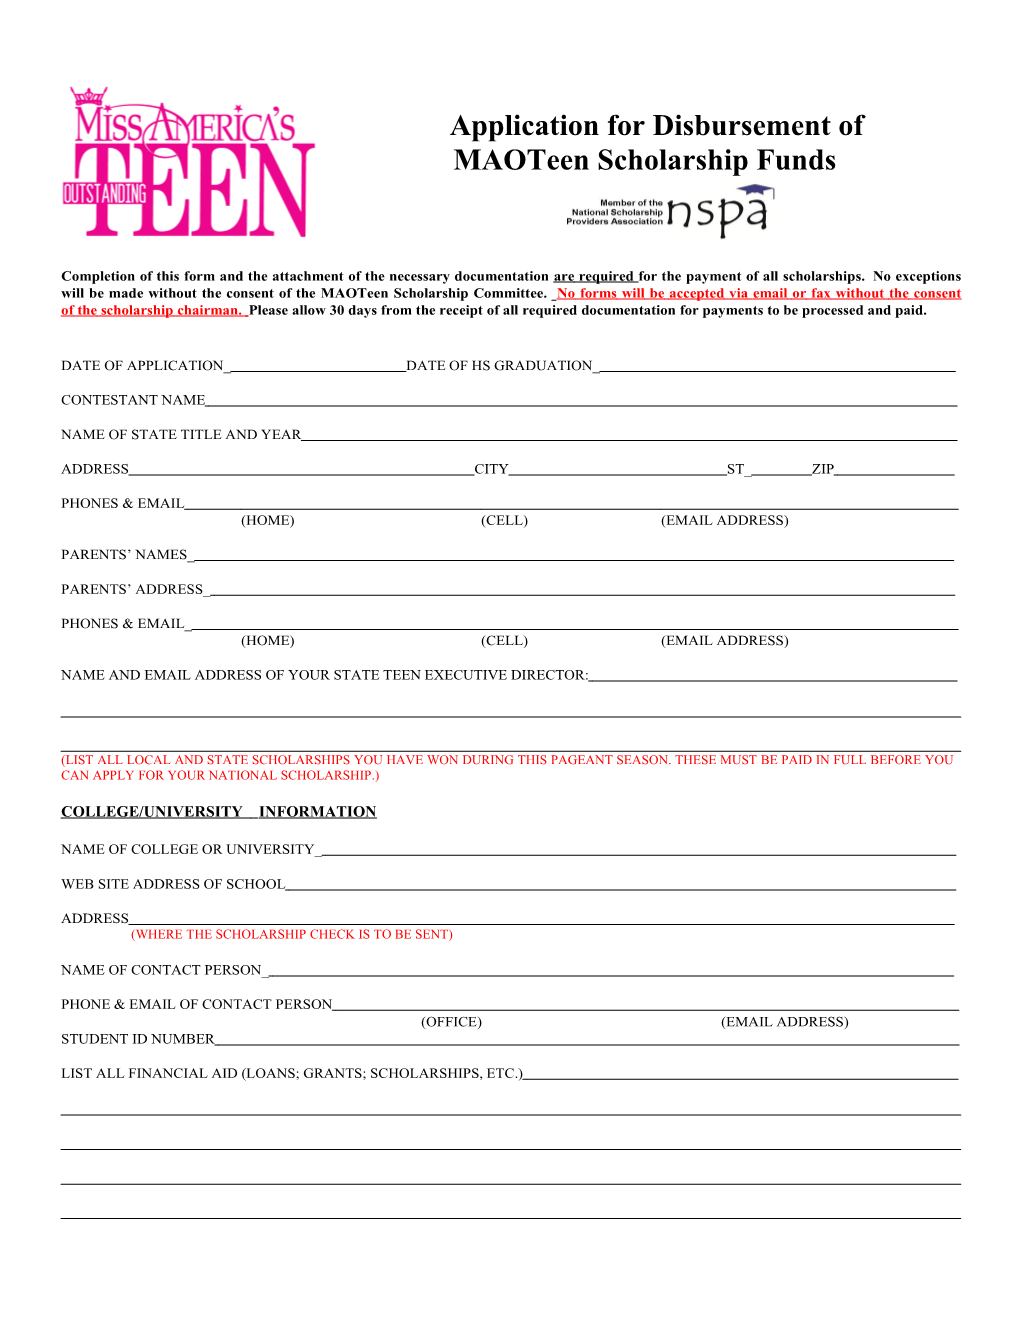 Application for Disbursement of Maoteen Scholarship Funds